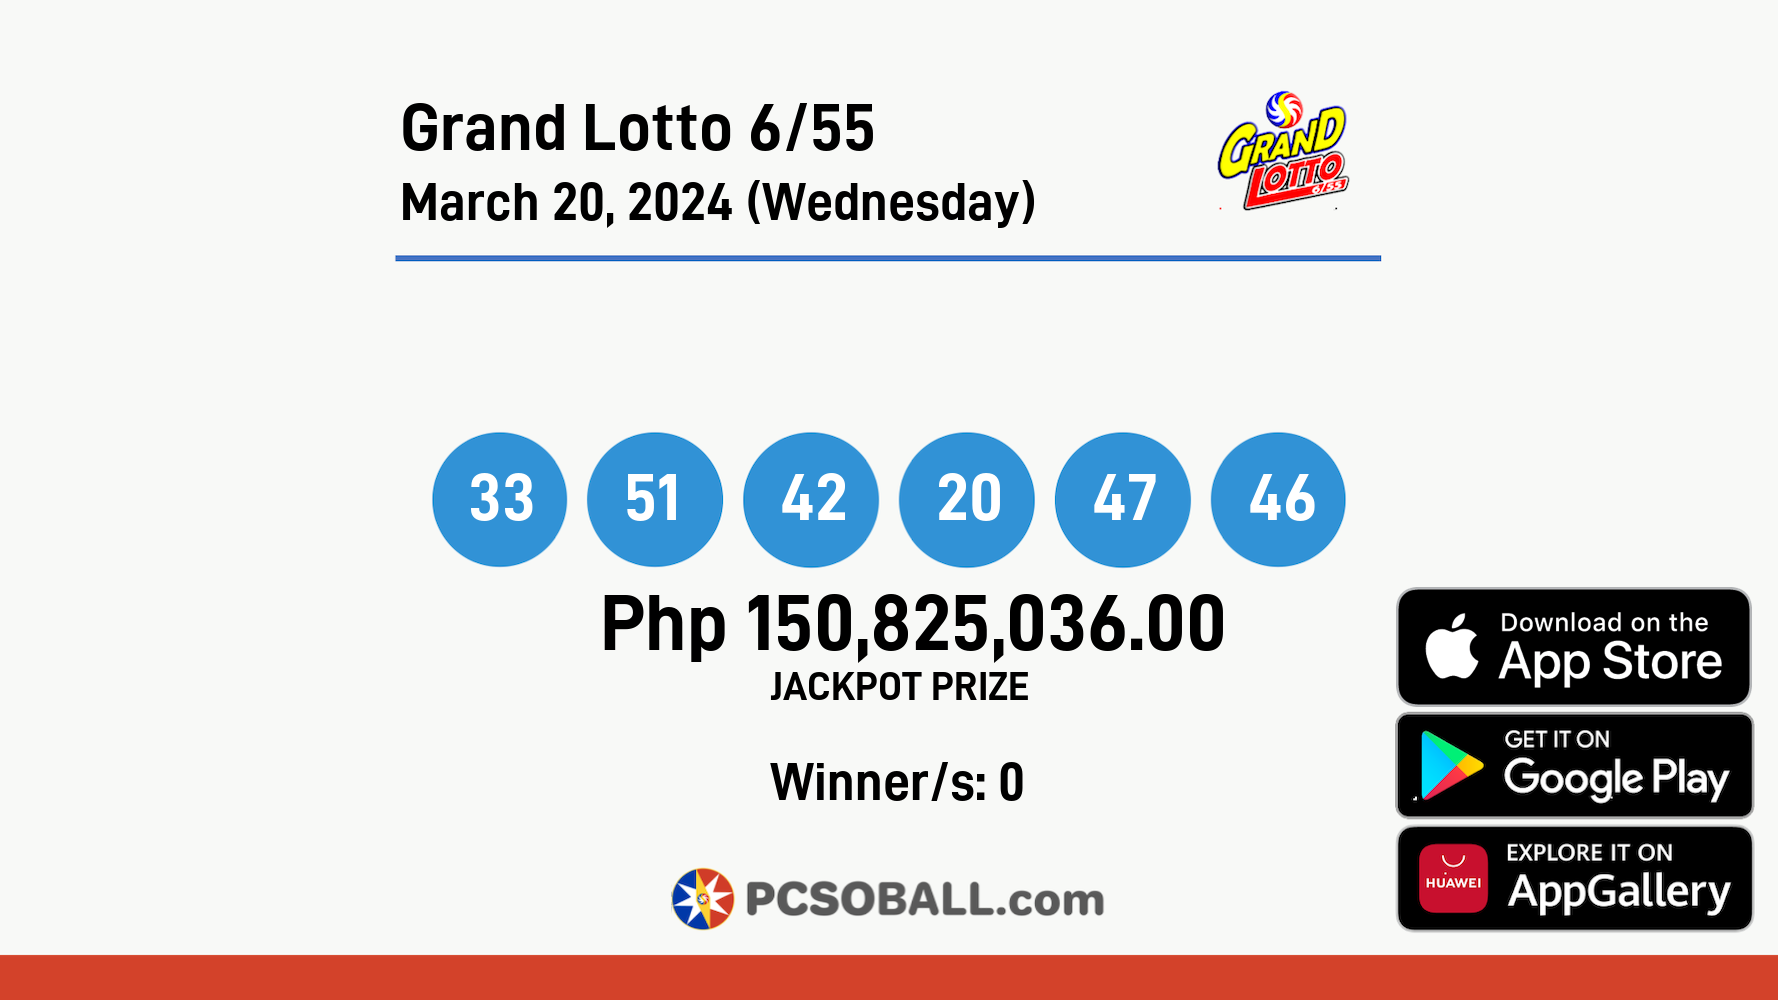 Grand Lotto 6/55 March 20, 2024 (Wednesday) Result